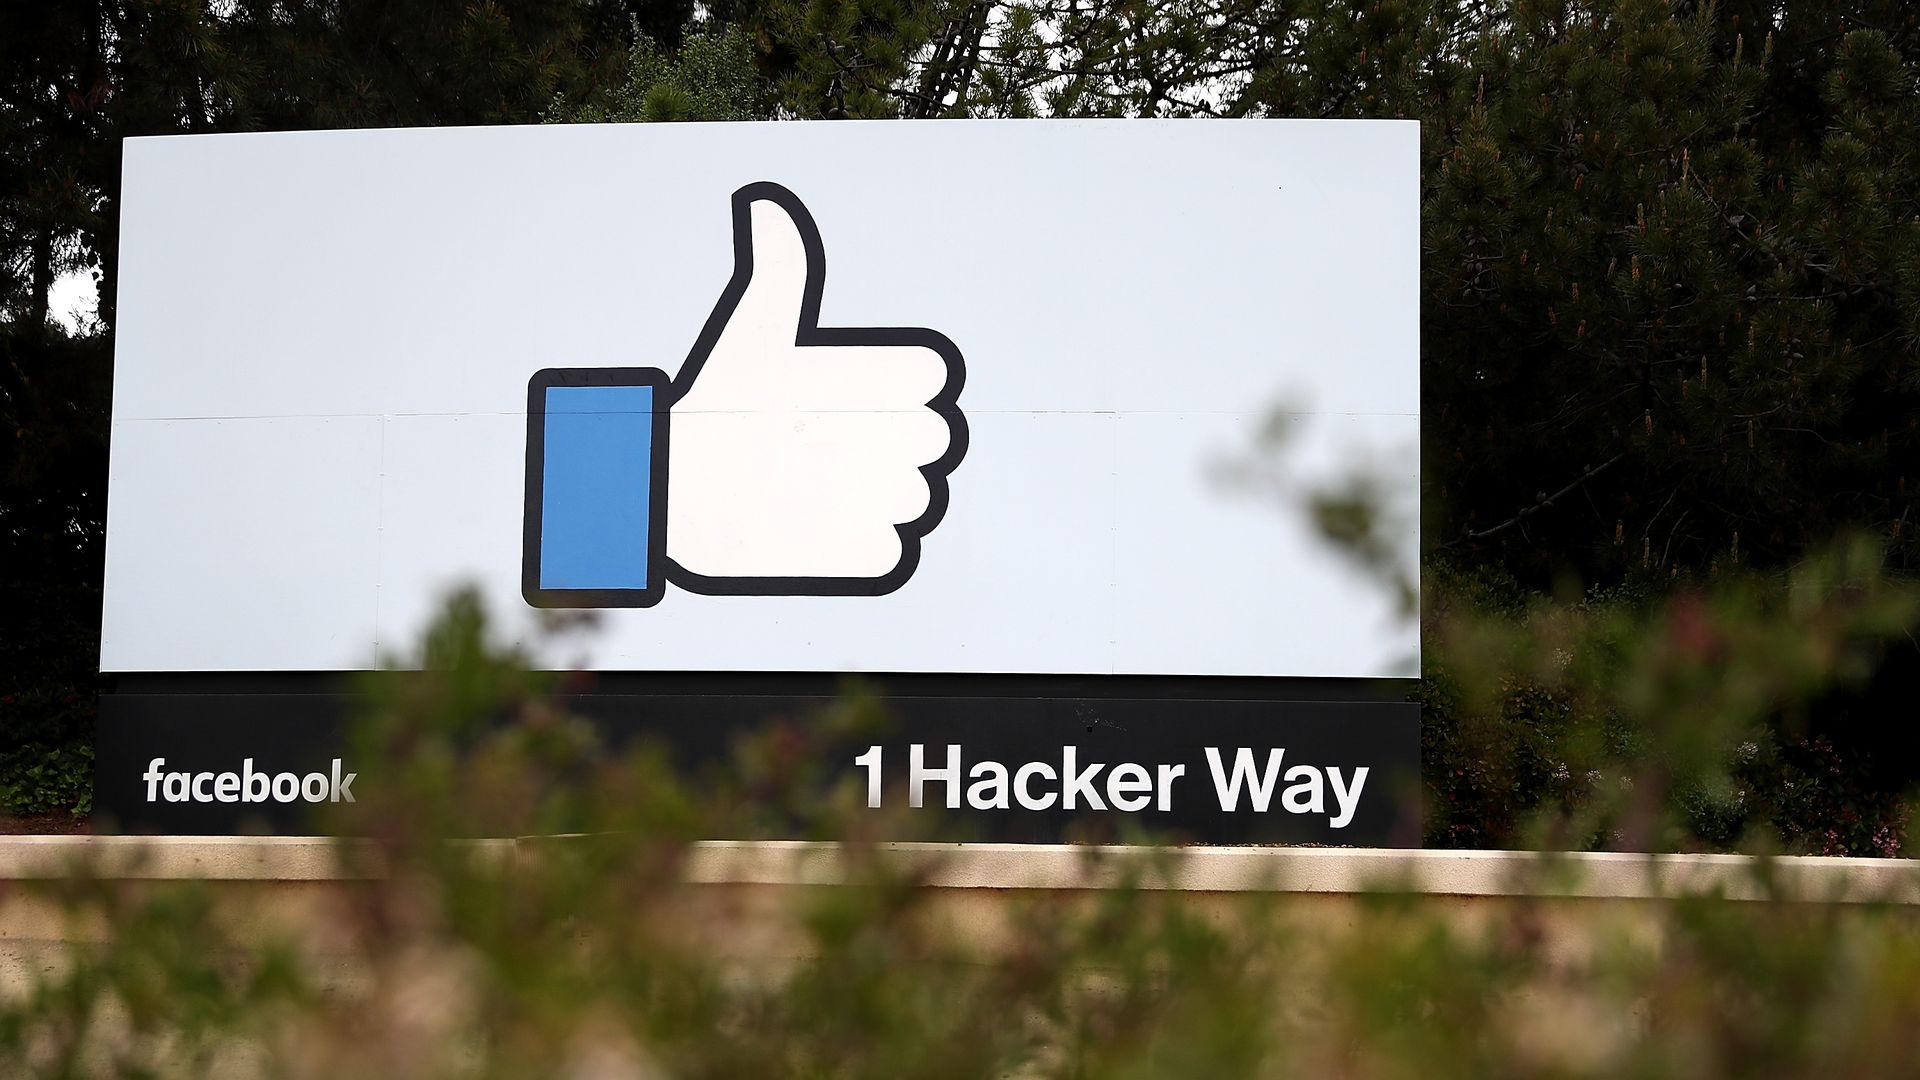 Photo of billboard outside Facebook headquarters with "like" icon and "1 Hacker Way" address